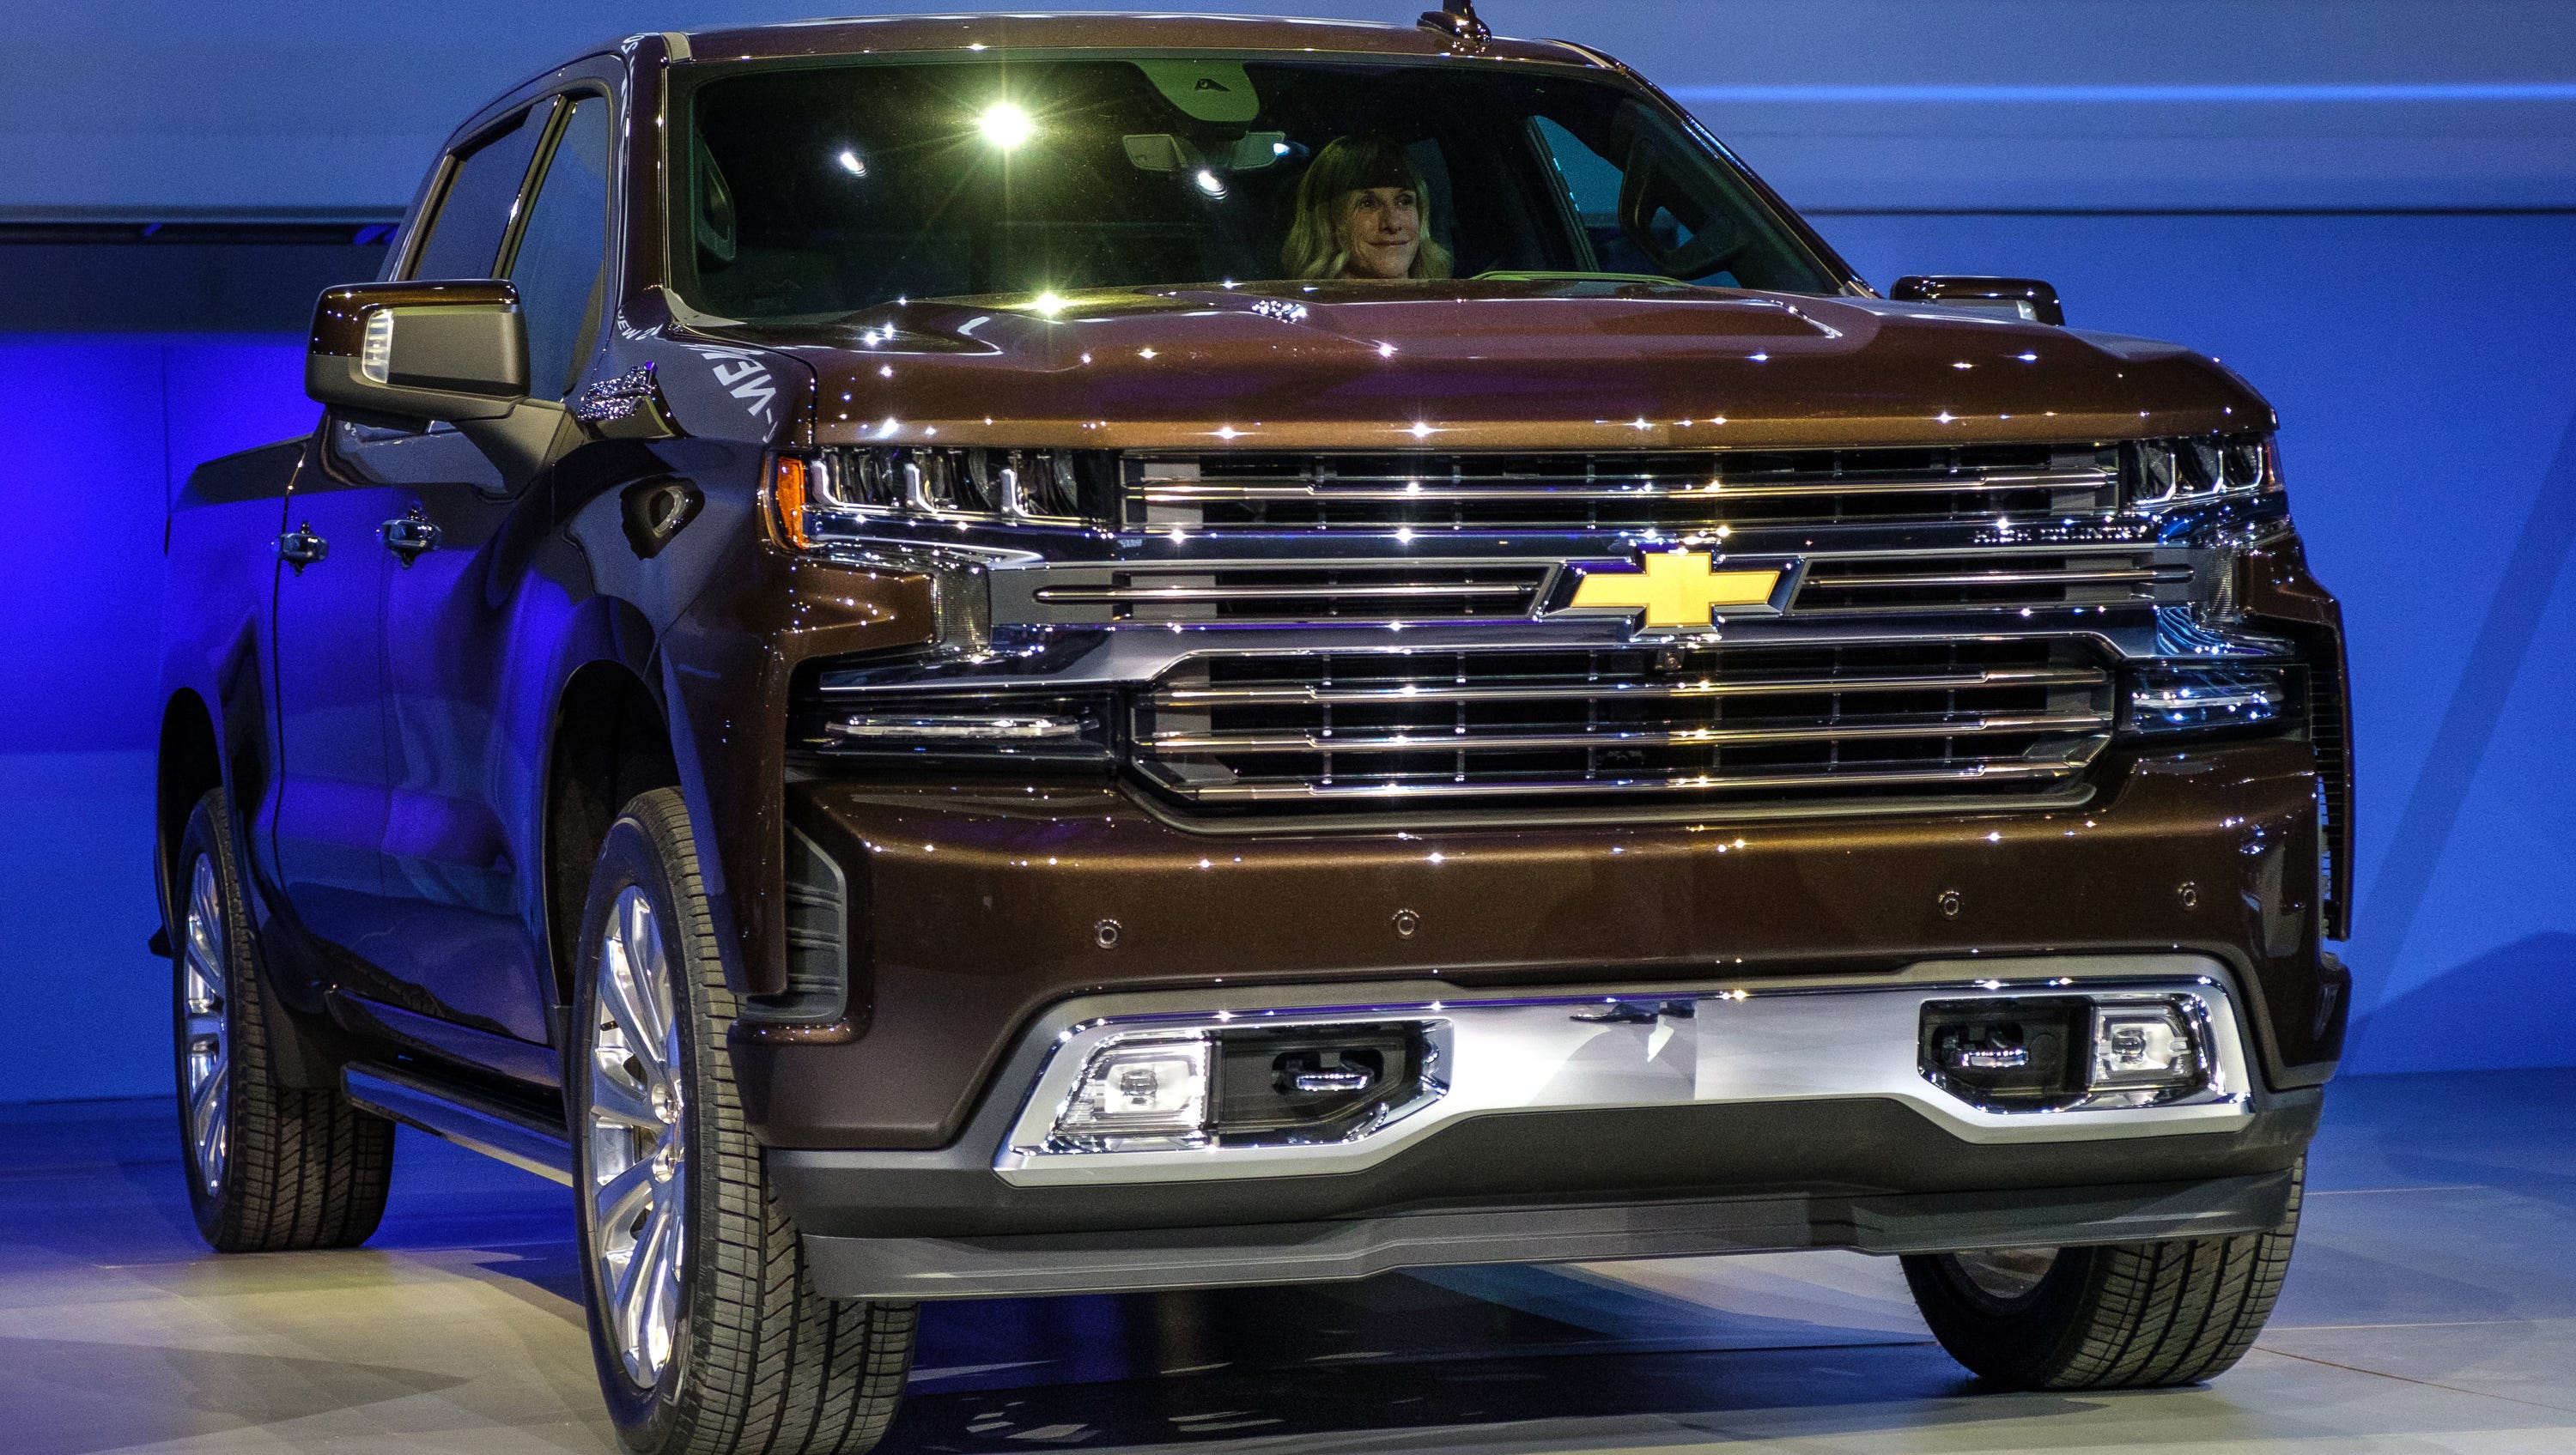 The 2019 Chevrolet Silverado 1500 High Country makes its world debut Saturday. The High Country features an exclusive front grille design with two-tone chrome and bronze finish, body-color accents plus chrome assist steps from wheel to wheel.